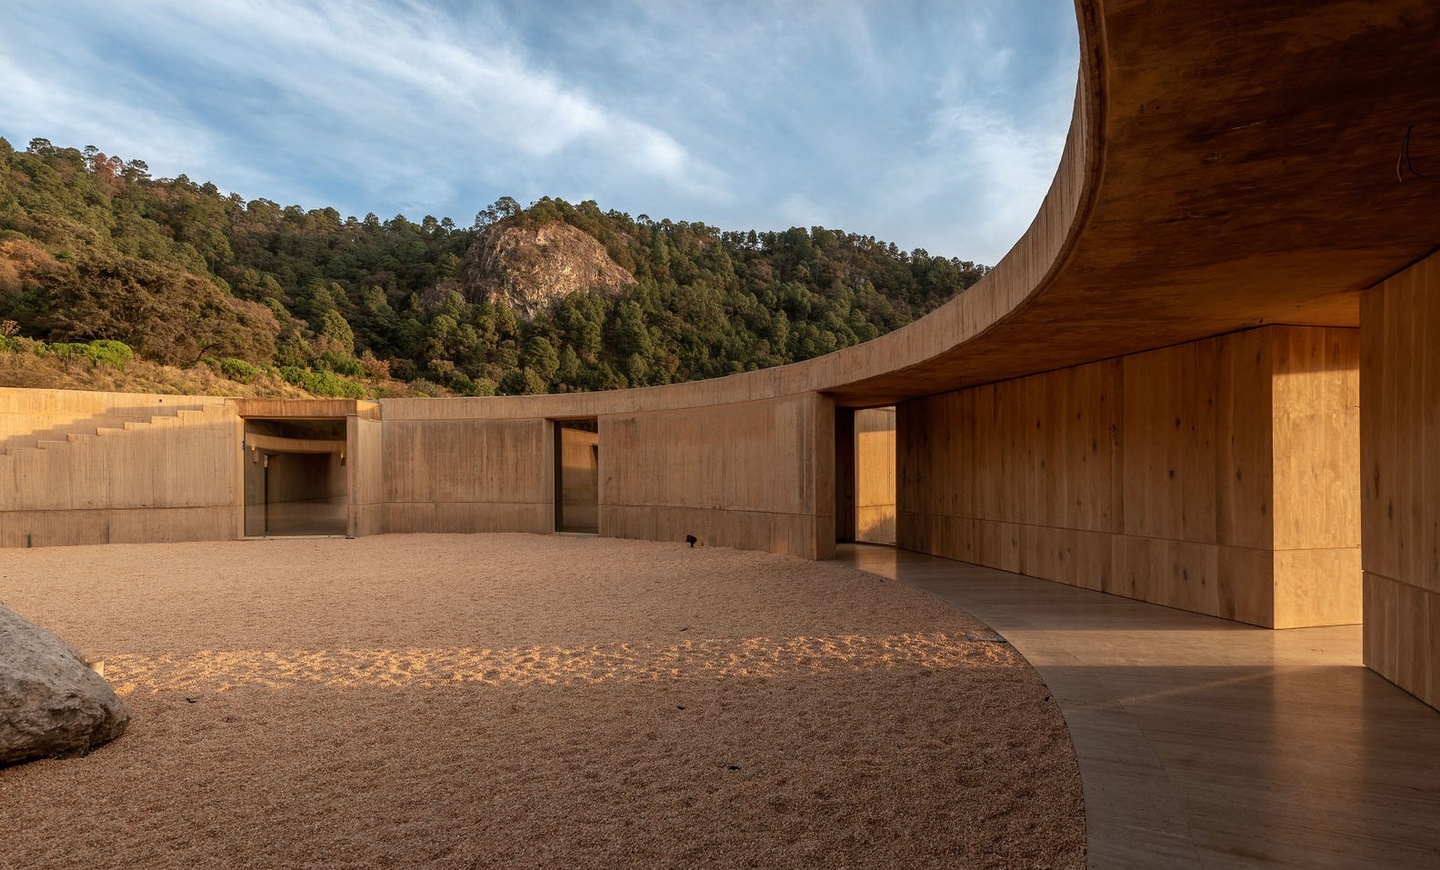 image of sand courtyard of earthen building with green mountains in the background